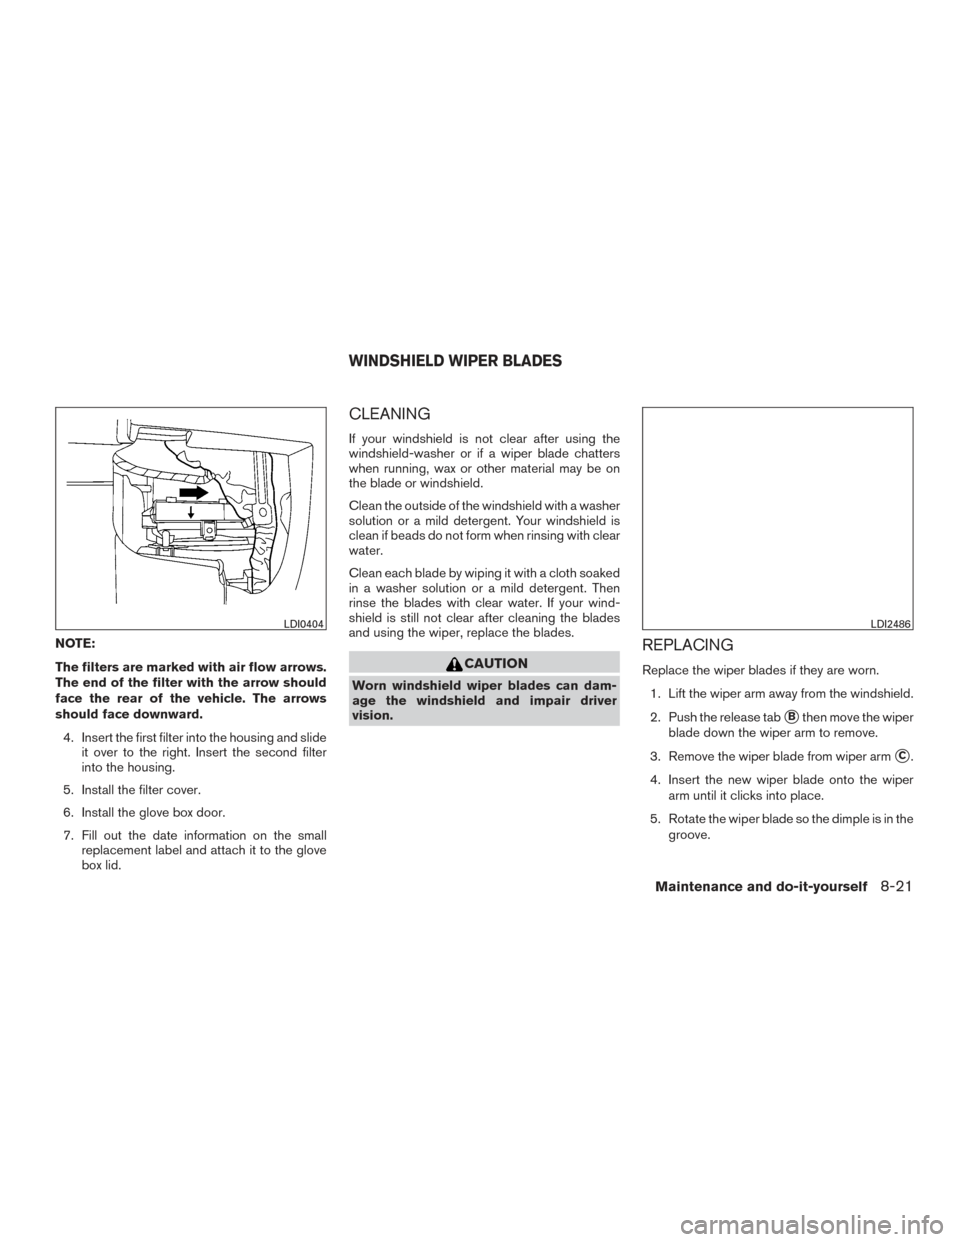 NISSAN TITAN 2015 1.G Owners Manual NOTE:
The filters are marked with air flow arrows.
The end of the filter with the arrow should
face the rear of the vehicle. The arrows
should face downward.4. Insert the first filter into the housing